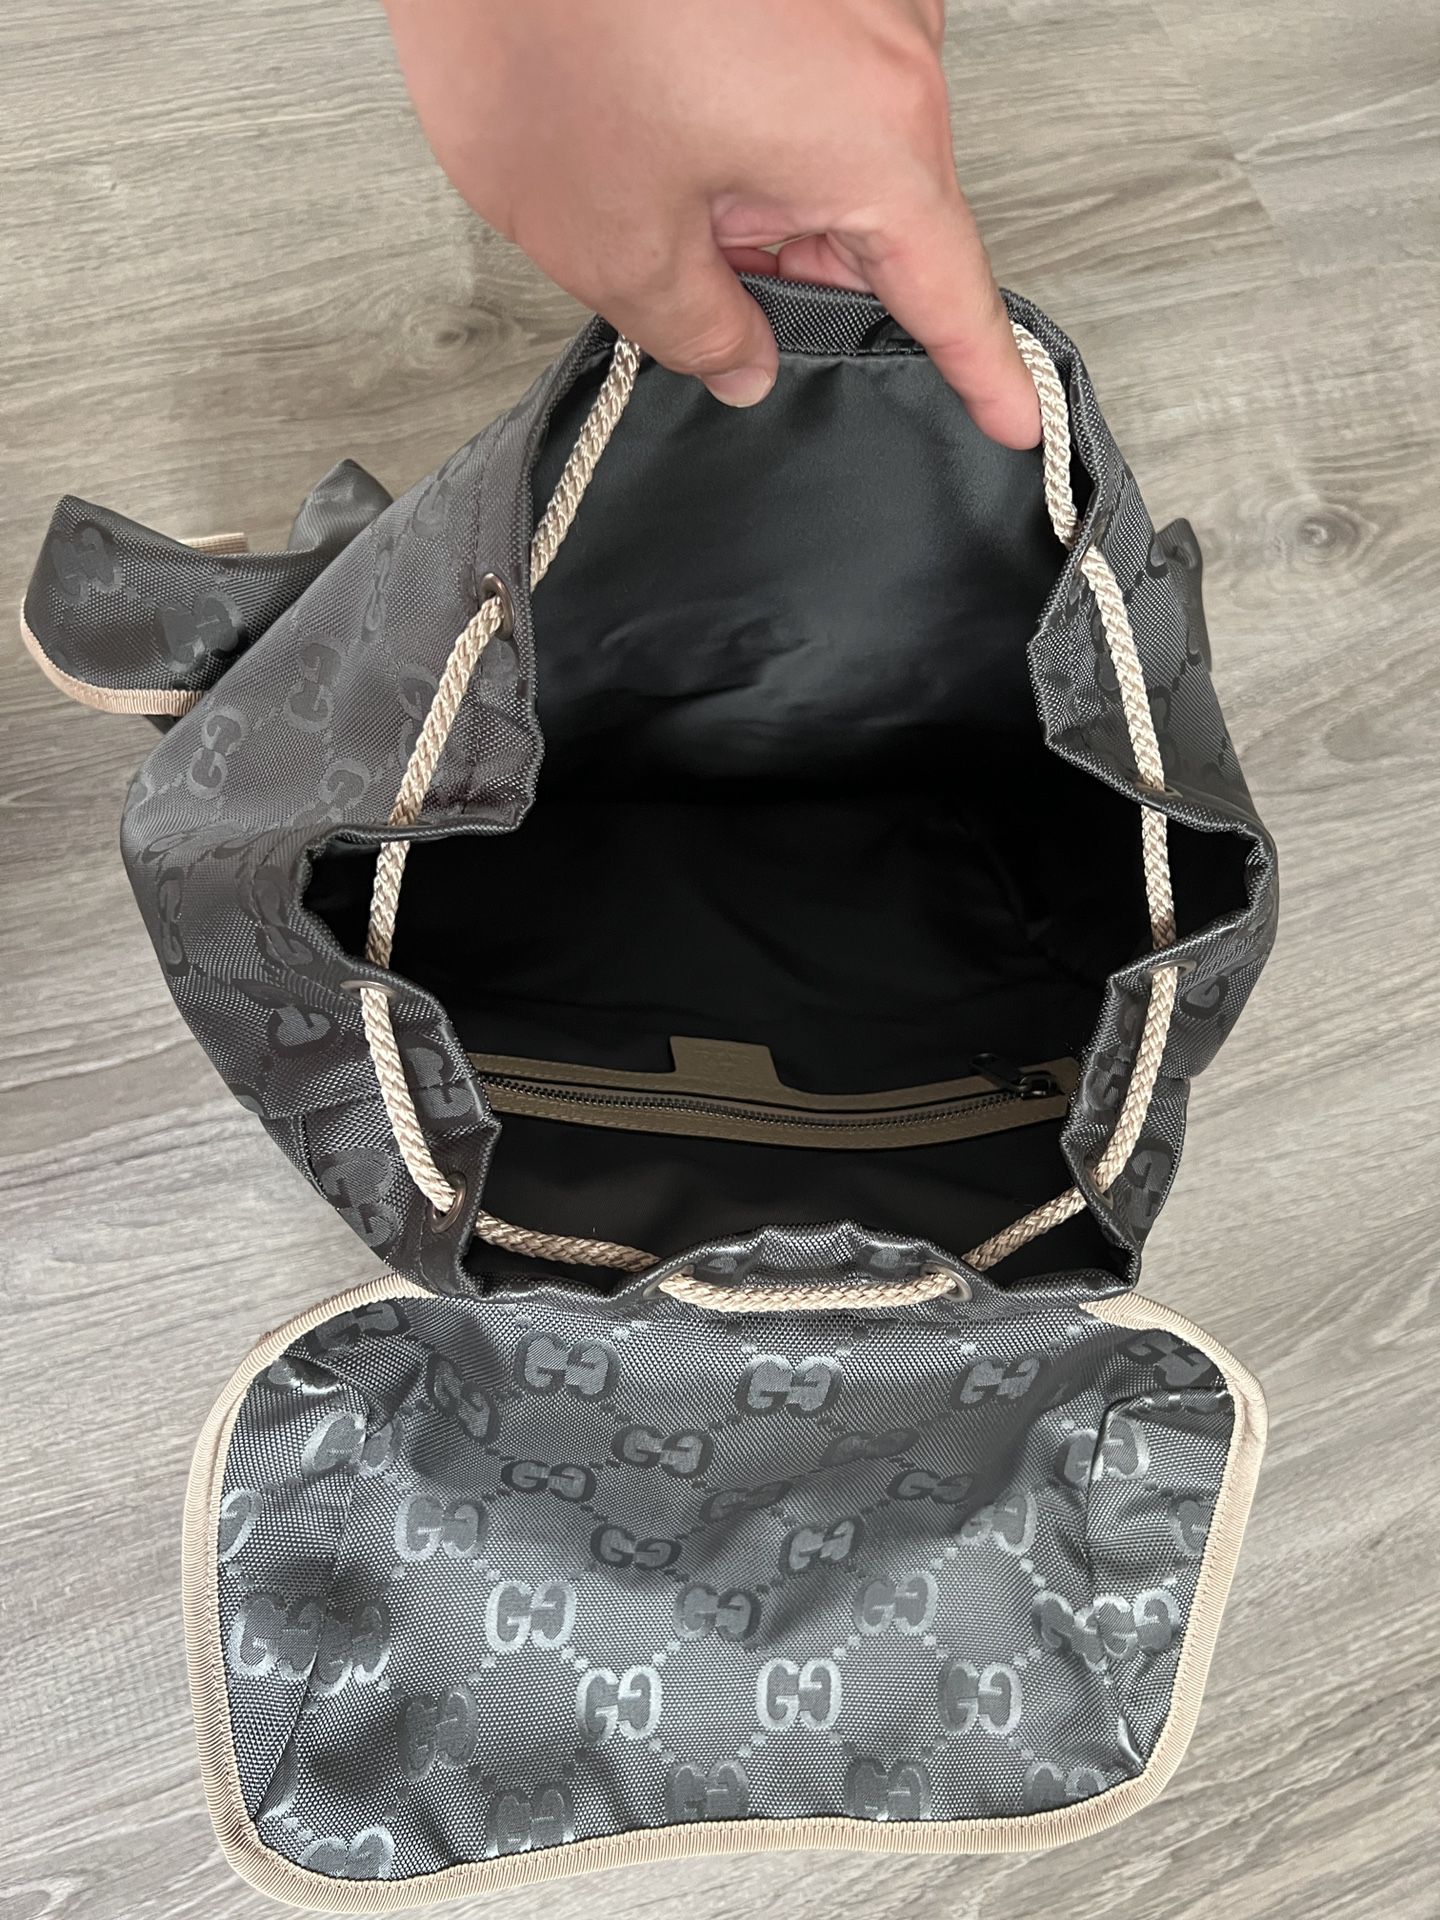 Gucci Black Sling Backpack for Sale in Tolleson, AZ - OfferUp